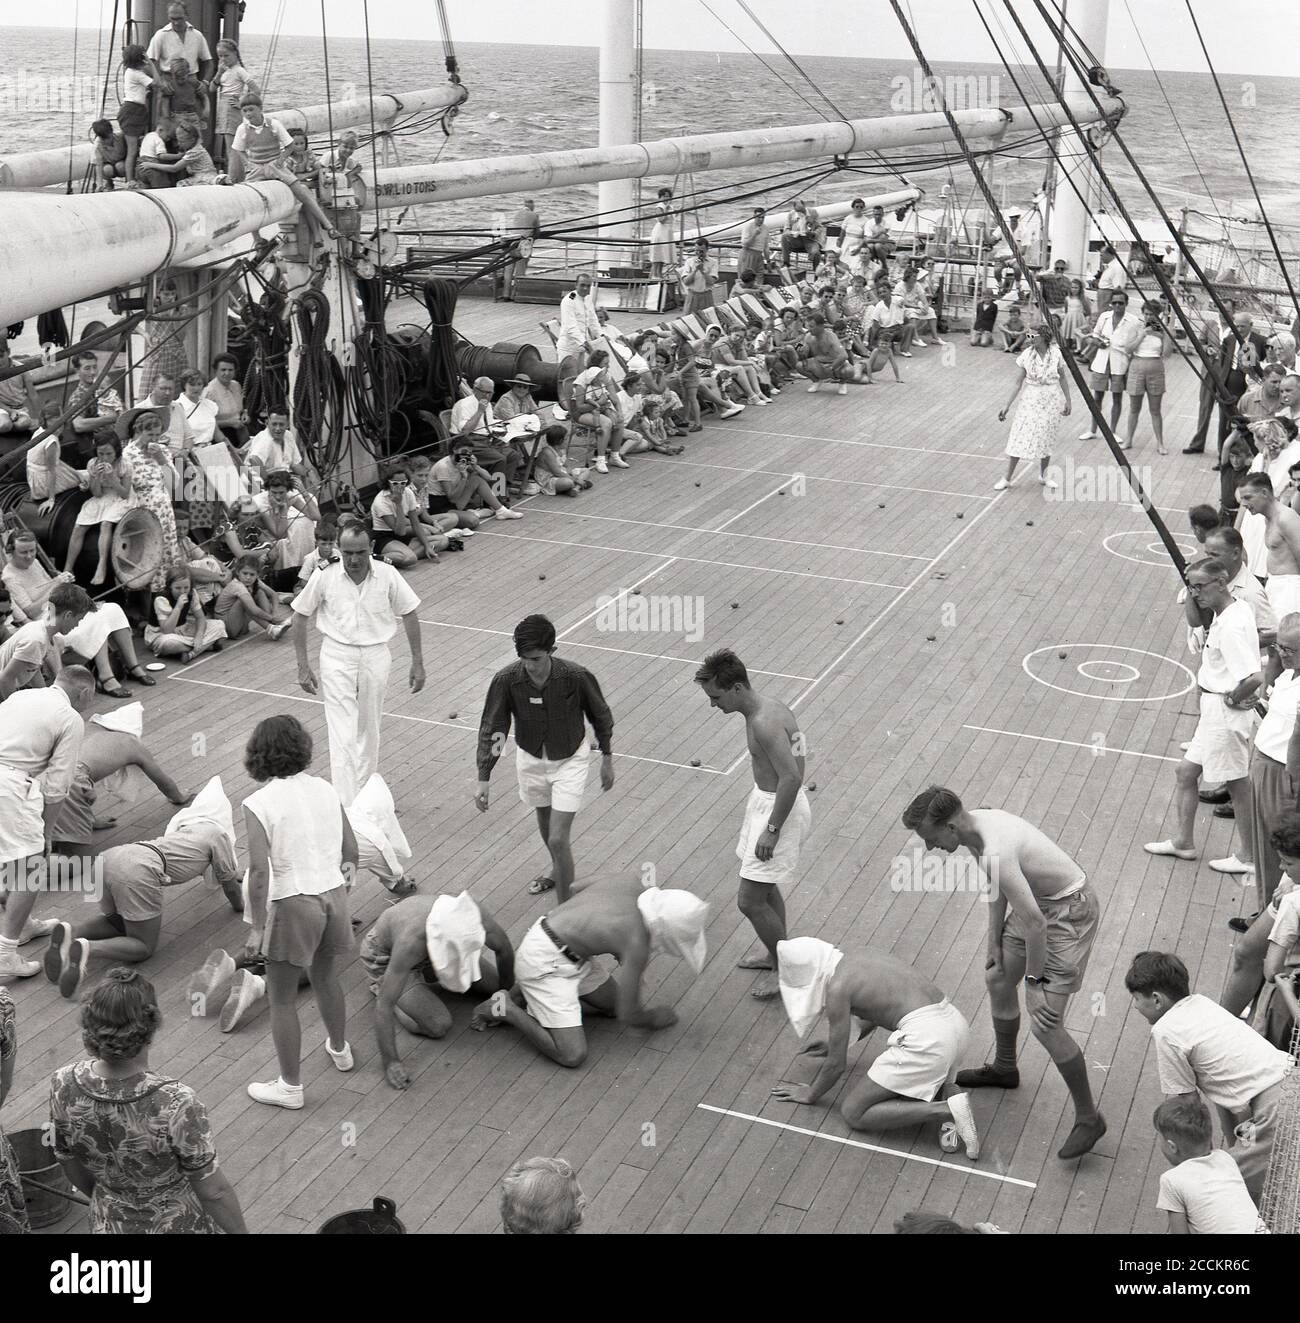 1950s, historical, on-board a Union-Castle steamship headed fot the Cape in South Africa, some male passengers playing a deck game, with sacks over the heads, acting as blindfolds, they have to hunt on their hands and knees searching for hidden items, watched by the ship's other passengers. Stock Photo